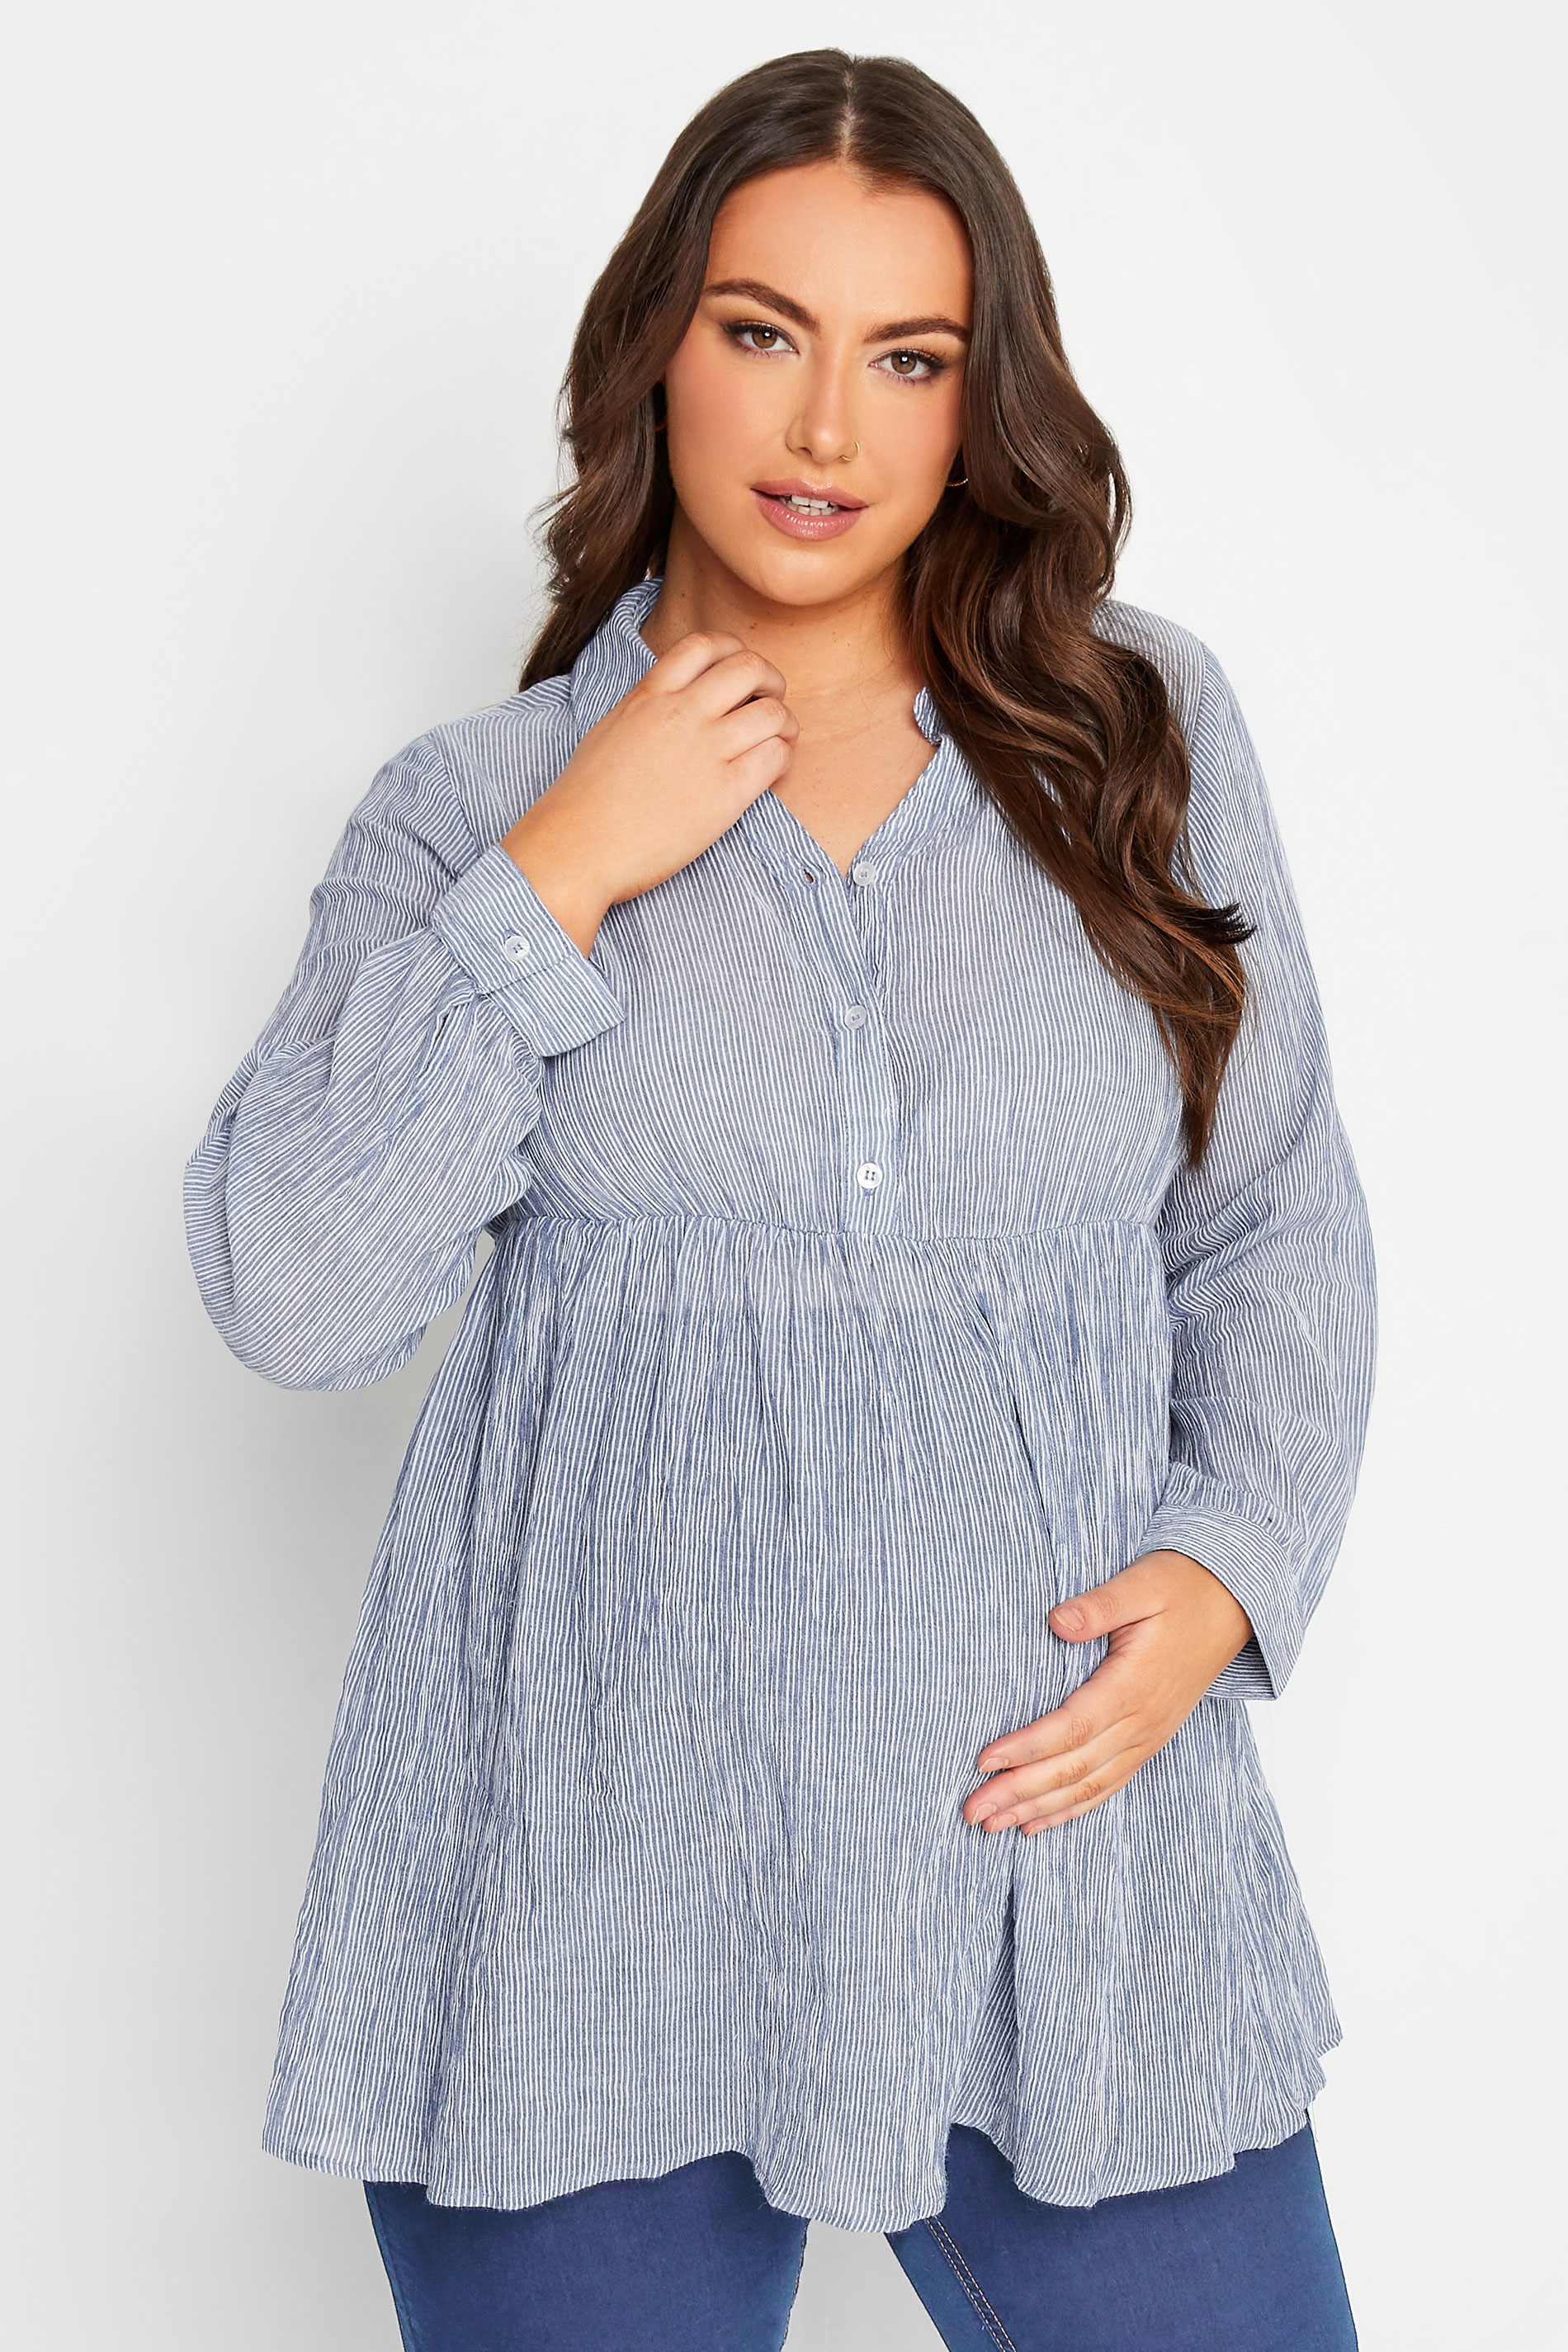 BUMP IT UP MATERNITY Plus Size Blue Stripe Popover Shirt | Yours Clothing 1